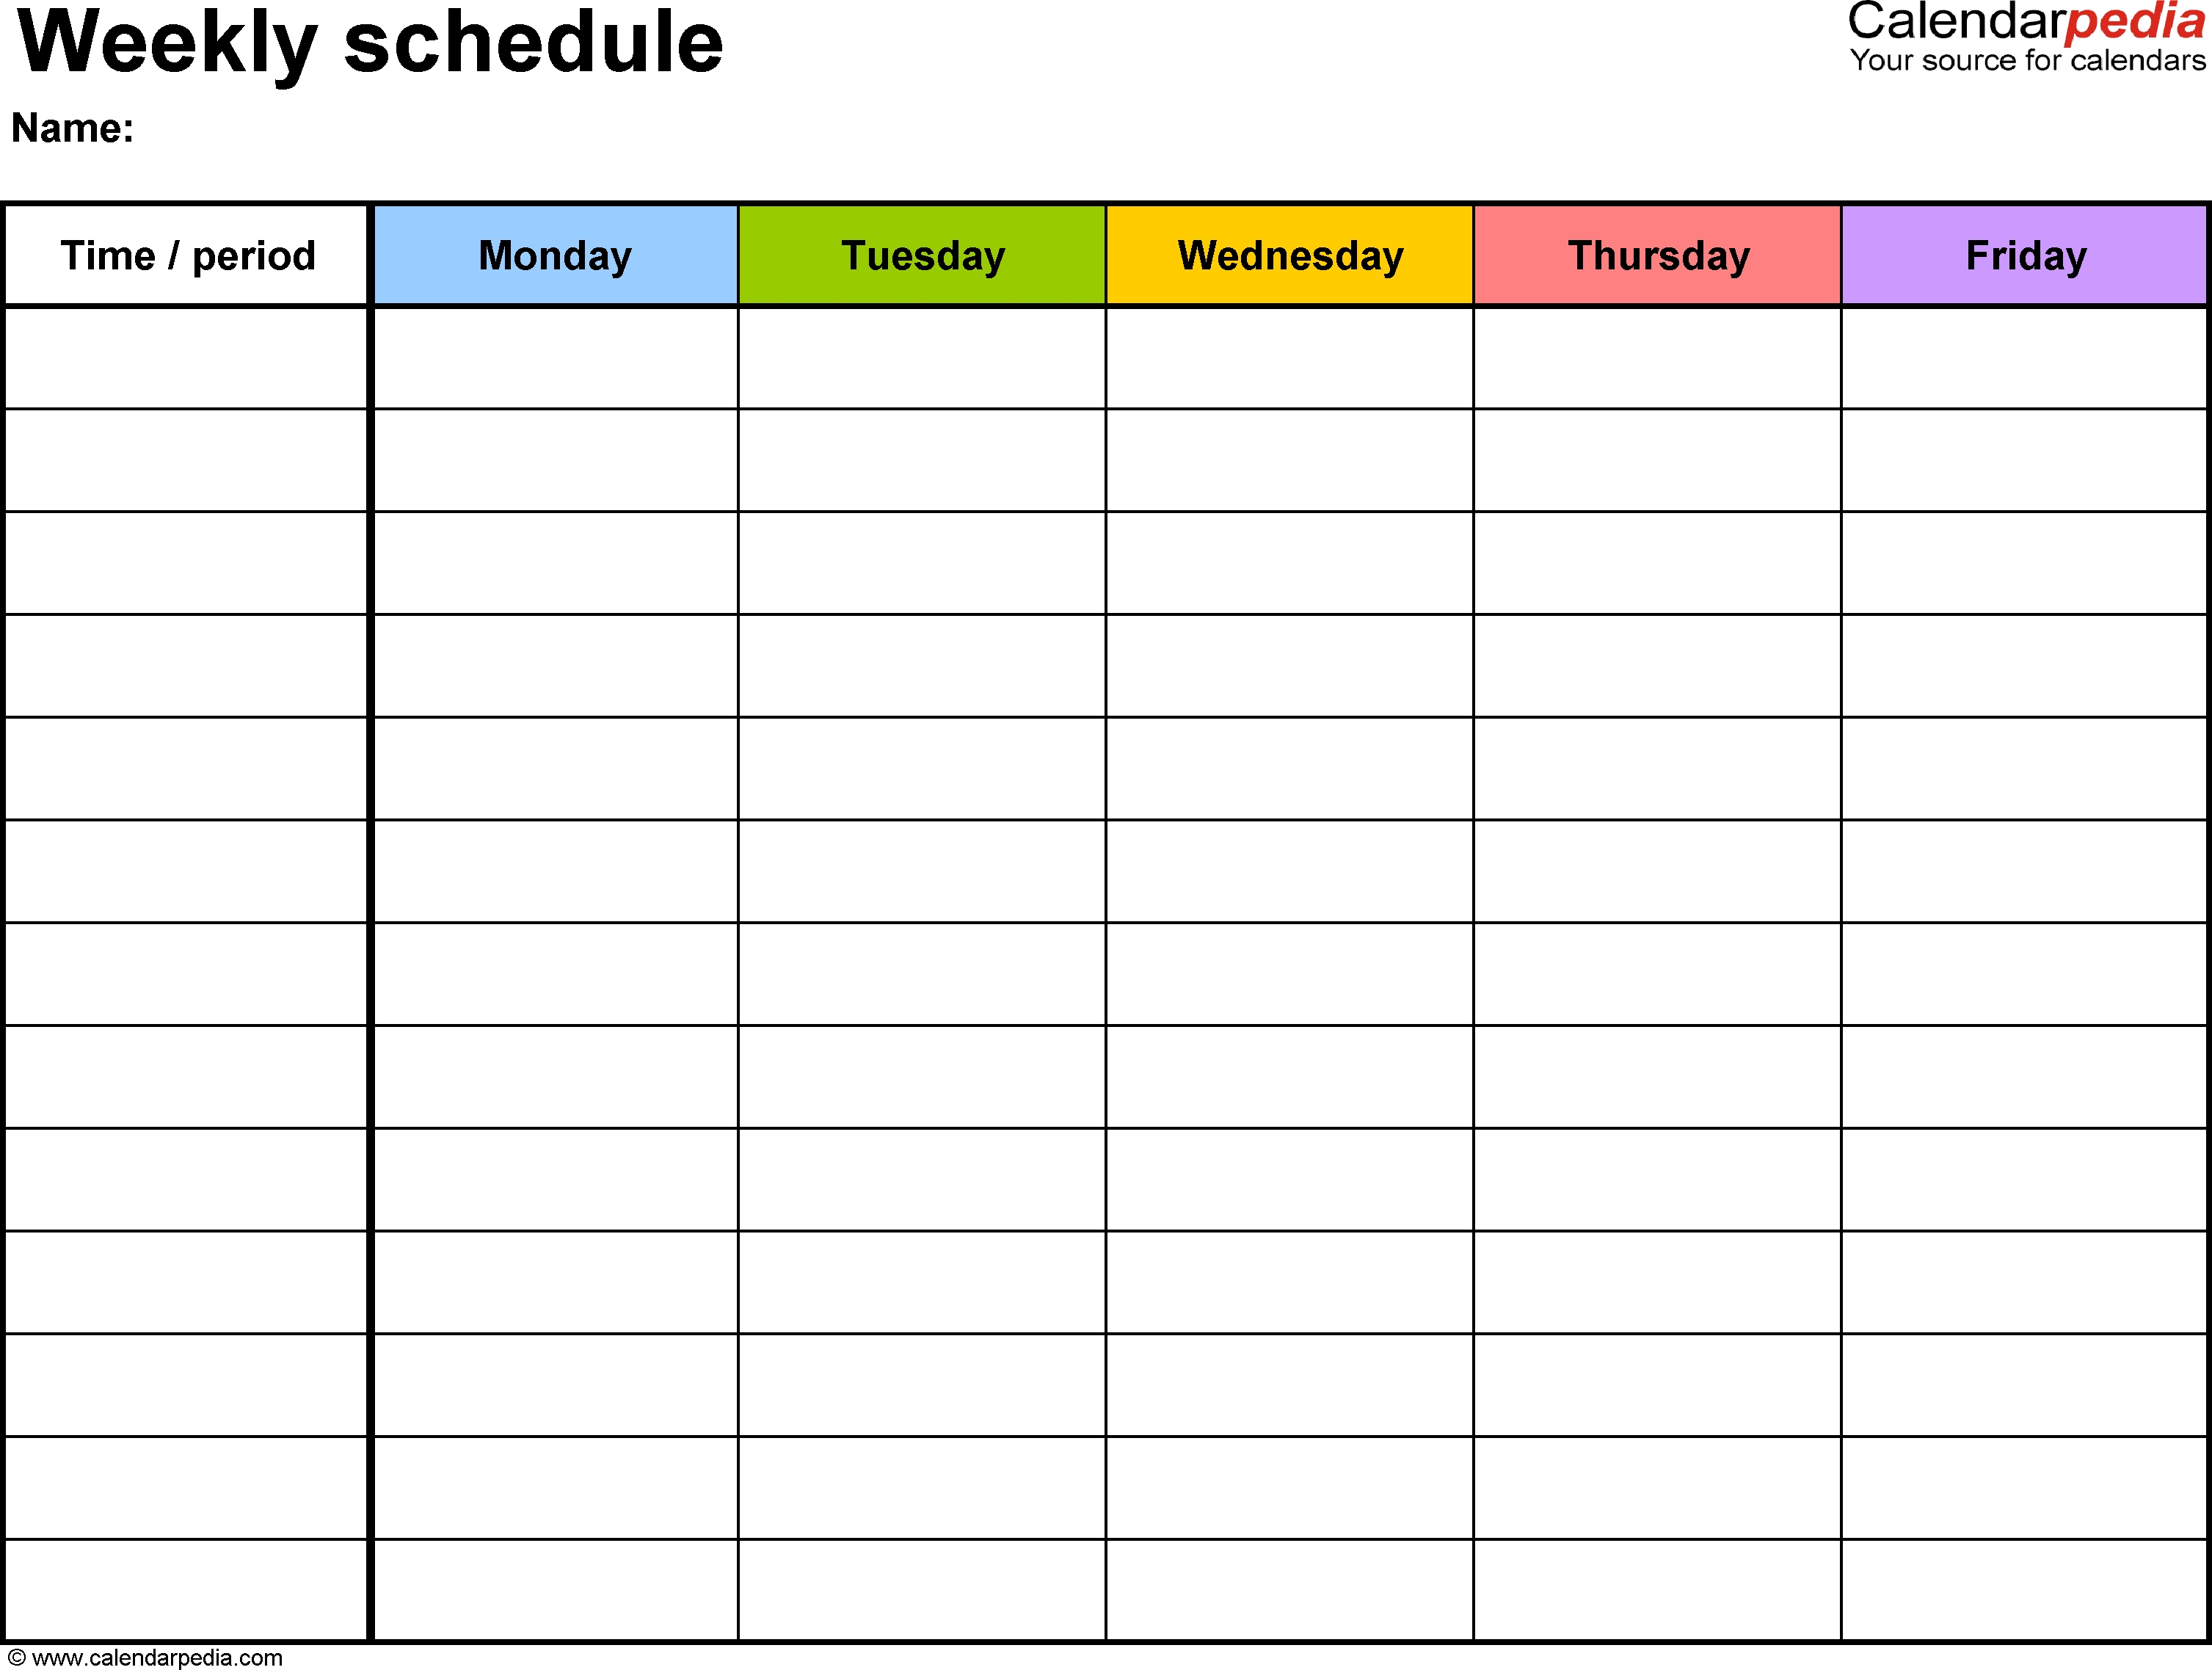 Free Weekly Schedule Templates For Excel - 18 Templates within Days Of The Week Schedules Free Template